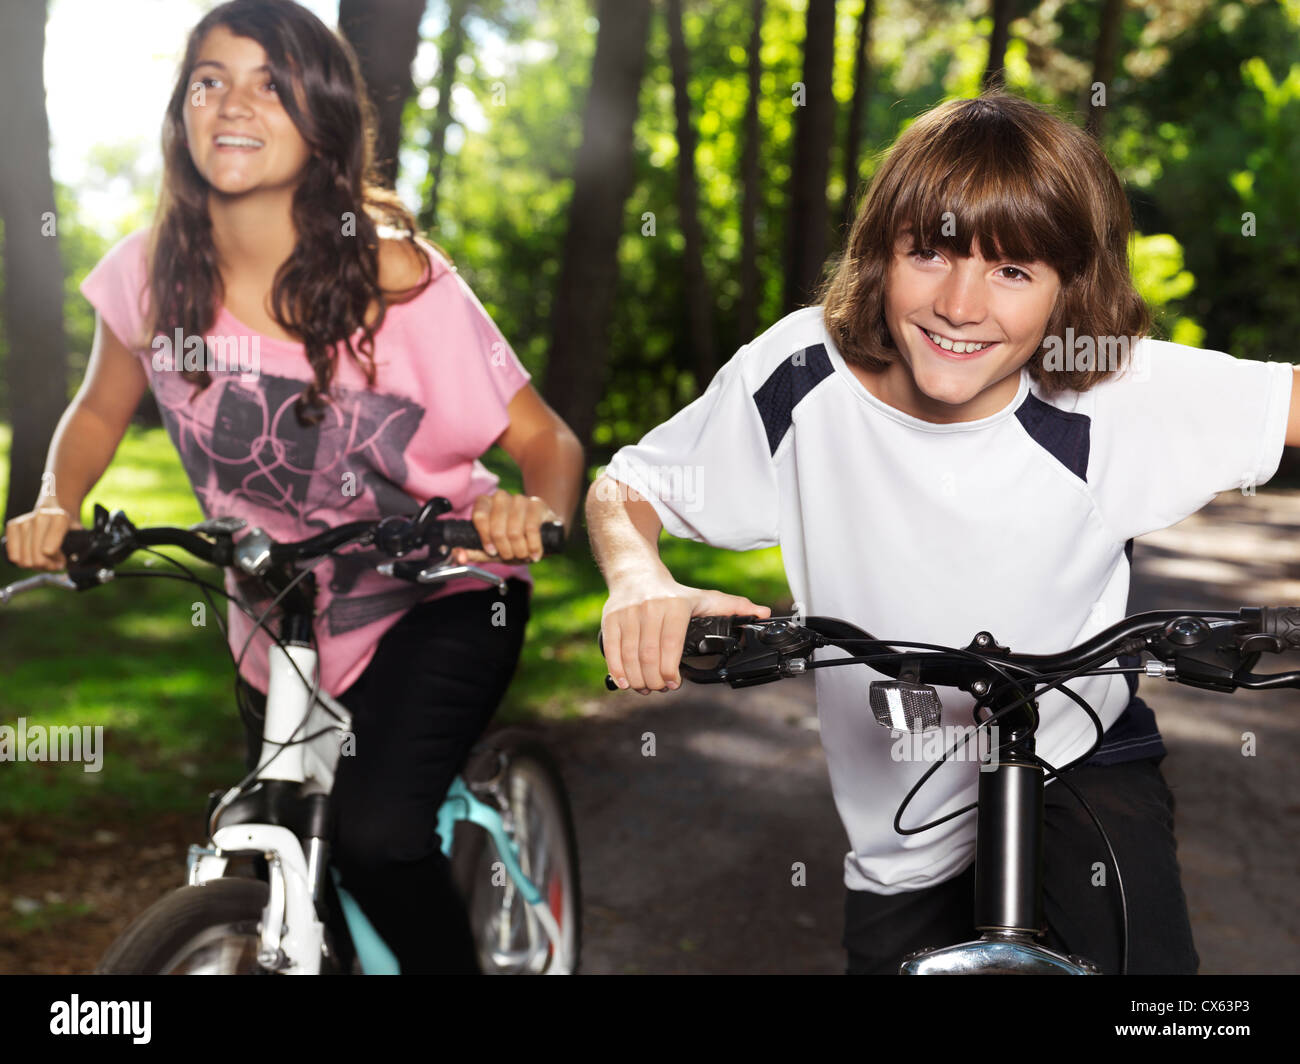 Two happy smiling children riding bicycles in a park, brother and sister, 10 and 13. Active outdoor lifestyle. Stock Photo